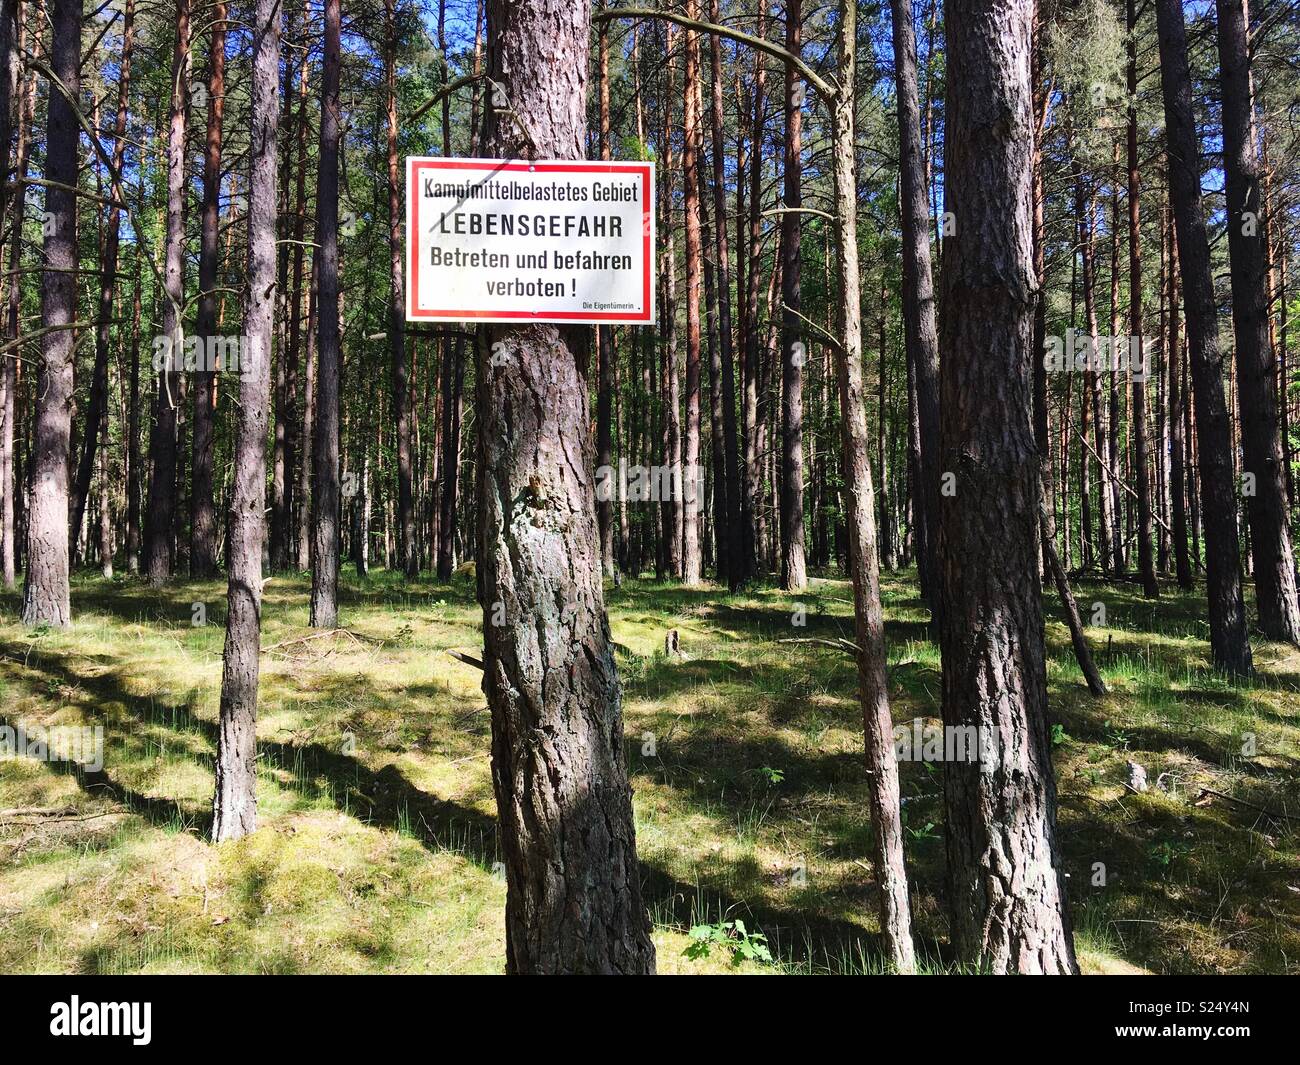 A German sign warning of entering a pine forest because of mortal danger due to contamination with ammunition or weapons left from military use under the Nazis, Mirow, Mecklenburg-Vorpommern, Germany Stock Photo